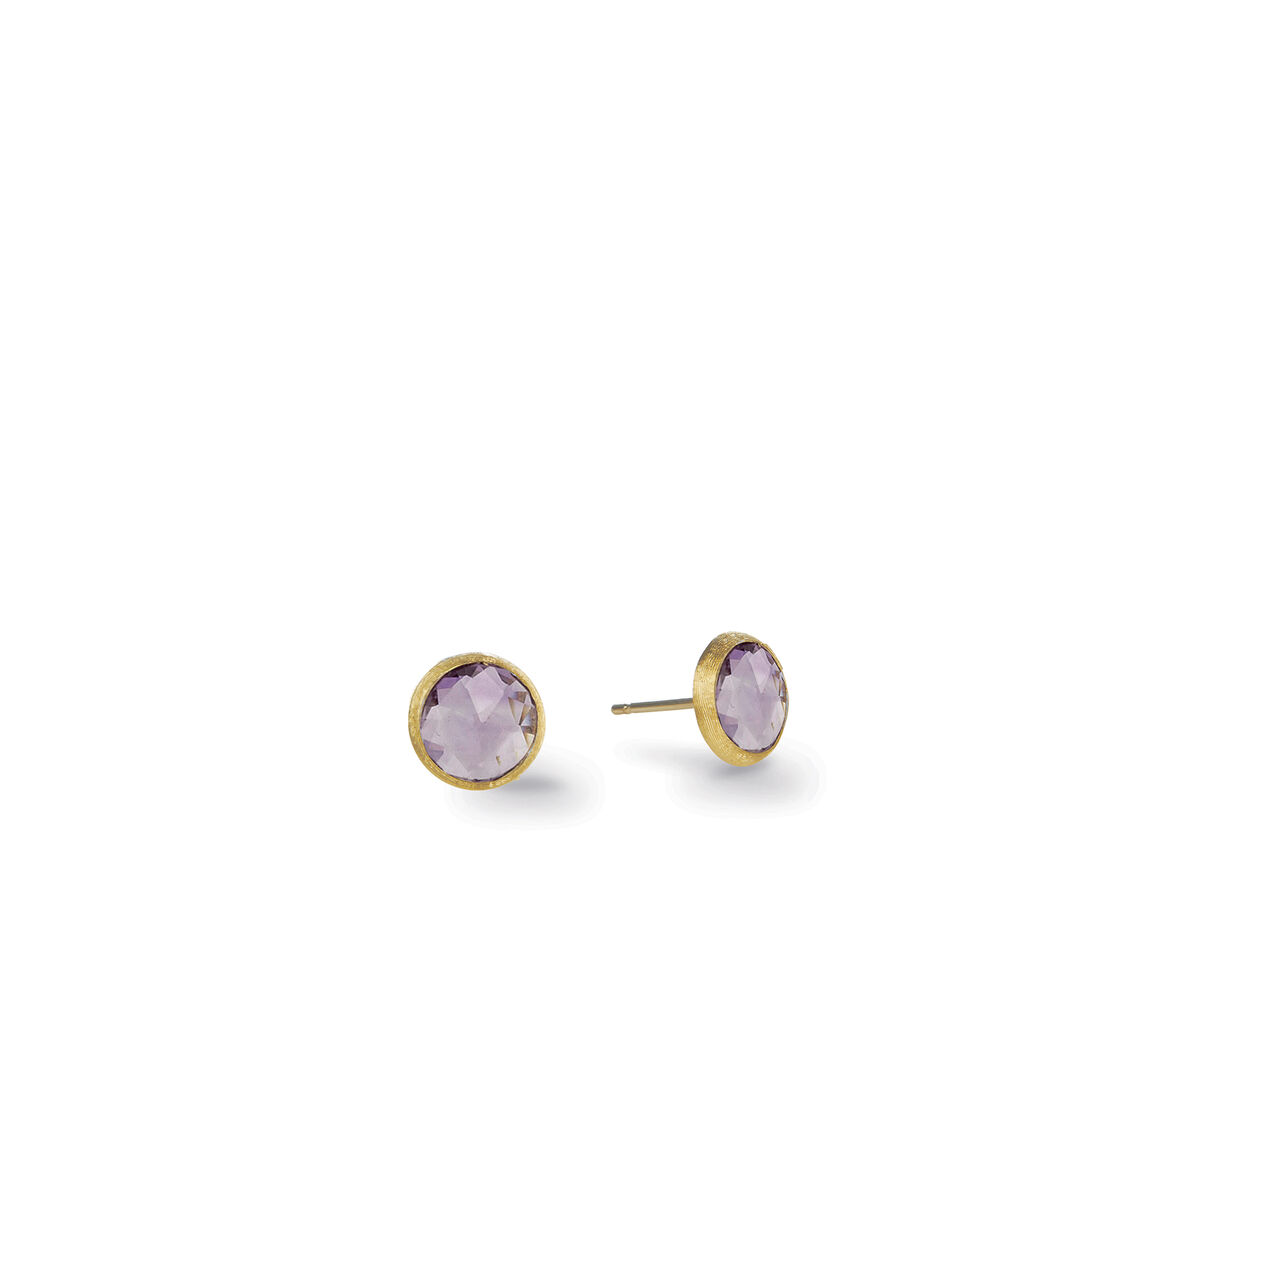 maison birks marco bicego jaipur color yellow gold amethyst stud earrings ob957 al01 y image number 0